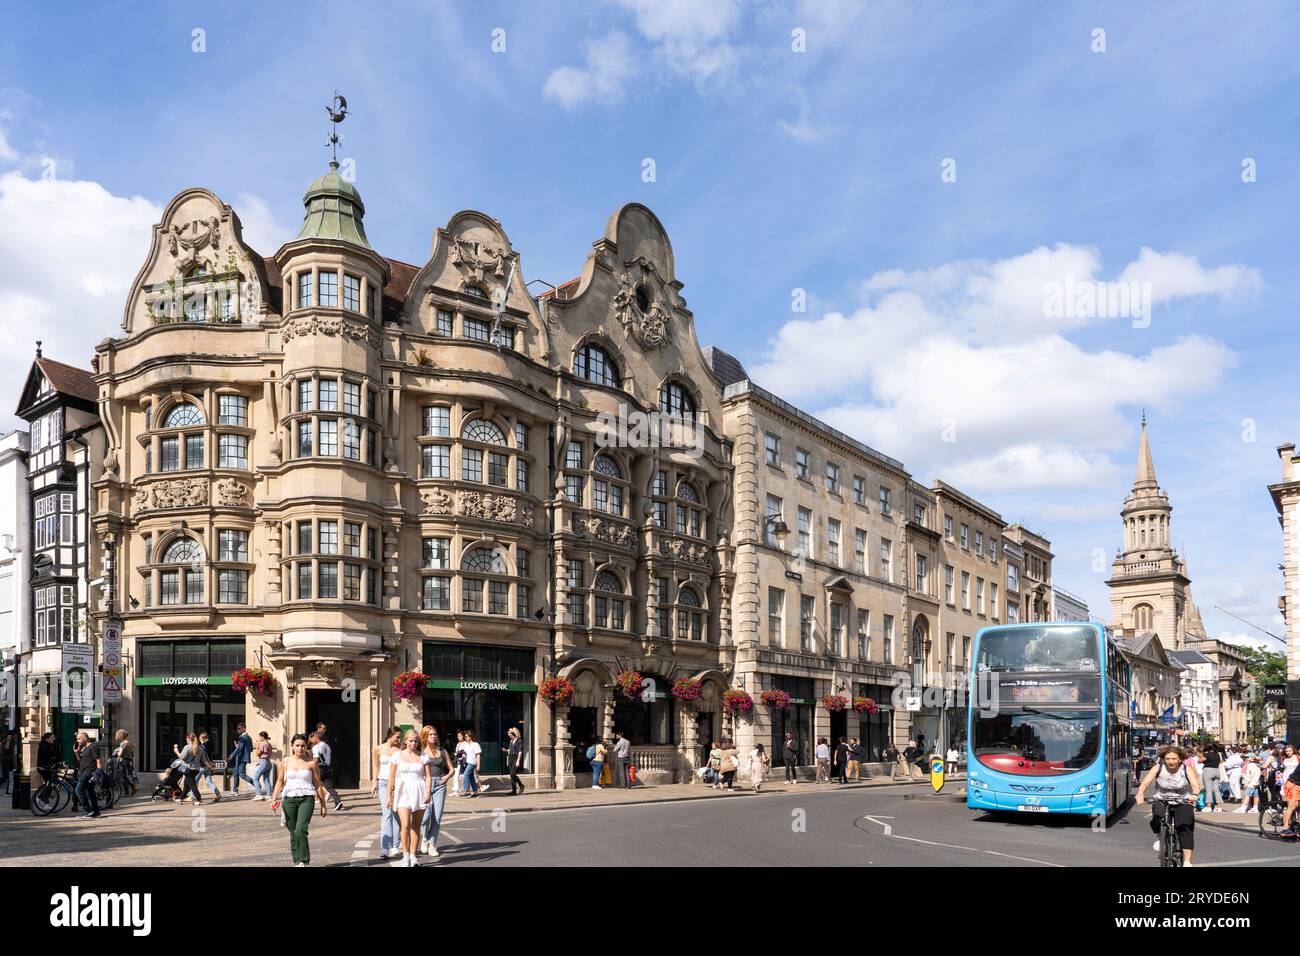 The corner of Cornmarket Street and High Street with the decorated stone facade of Lloyds Bank in central Oxford on a summer's day. England Stock Photo